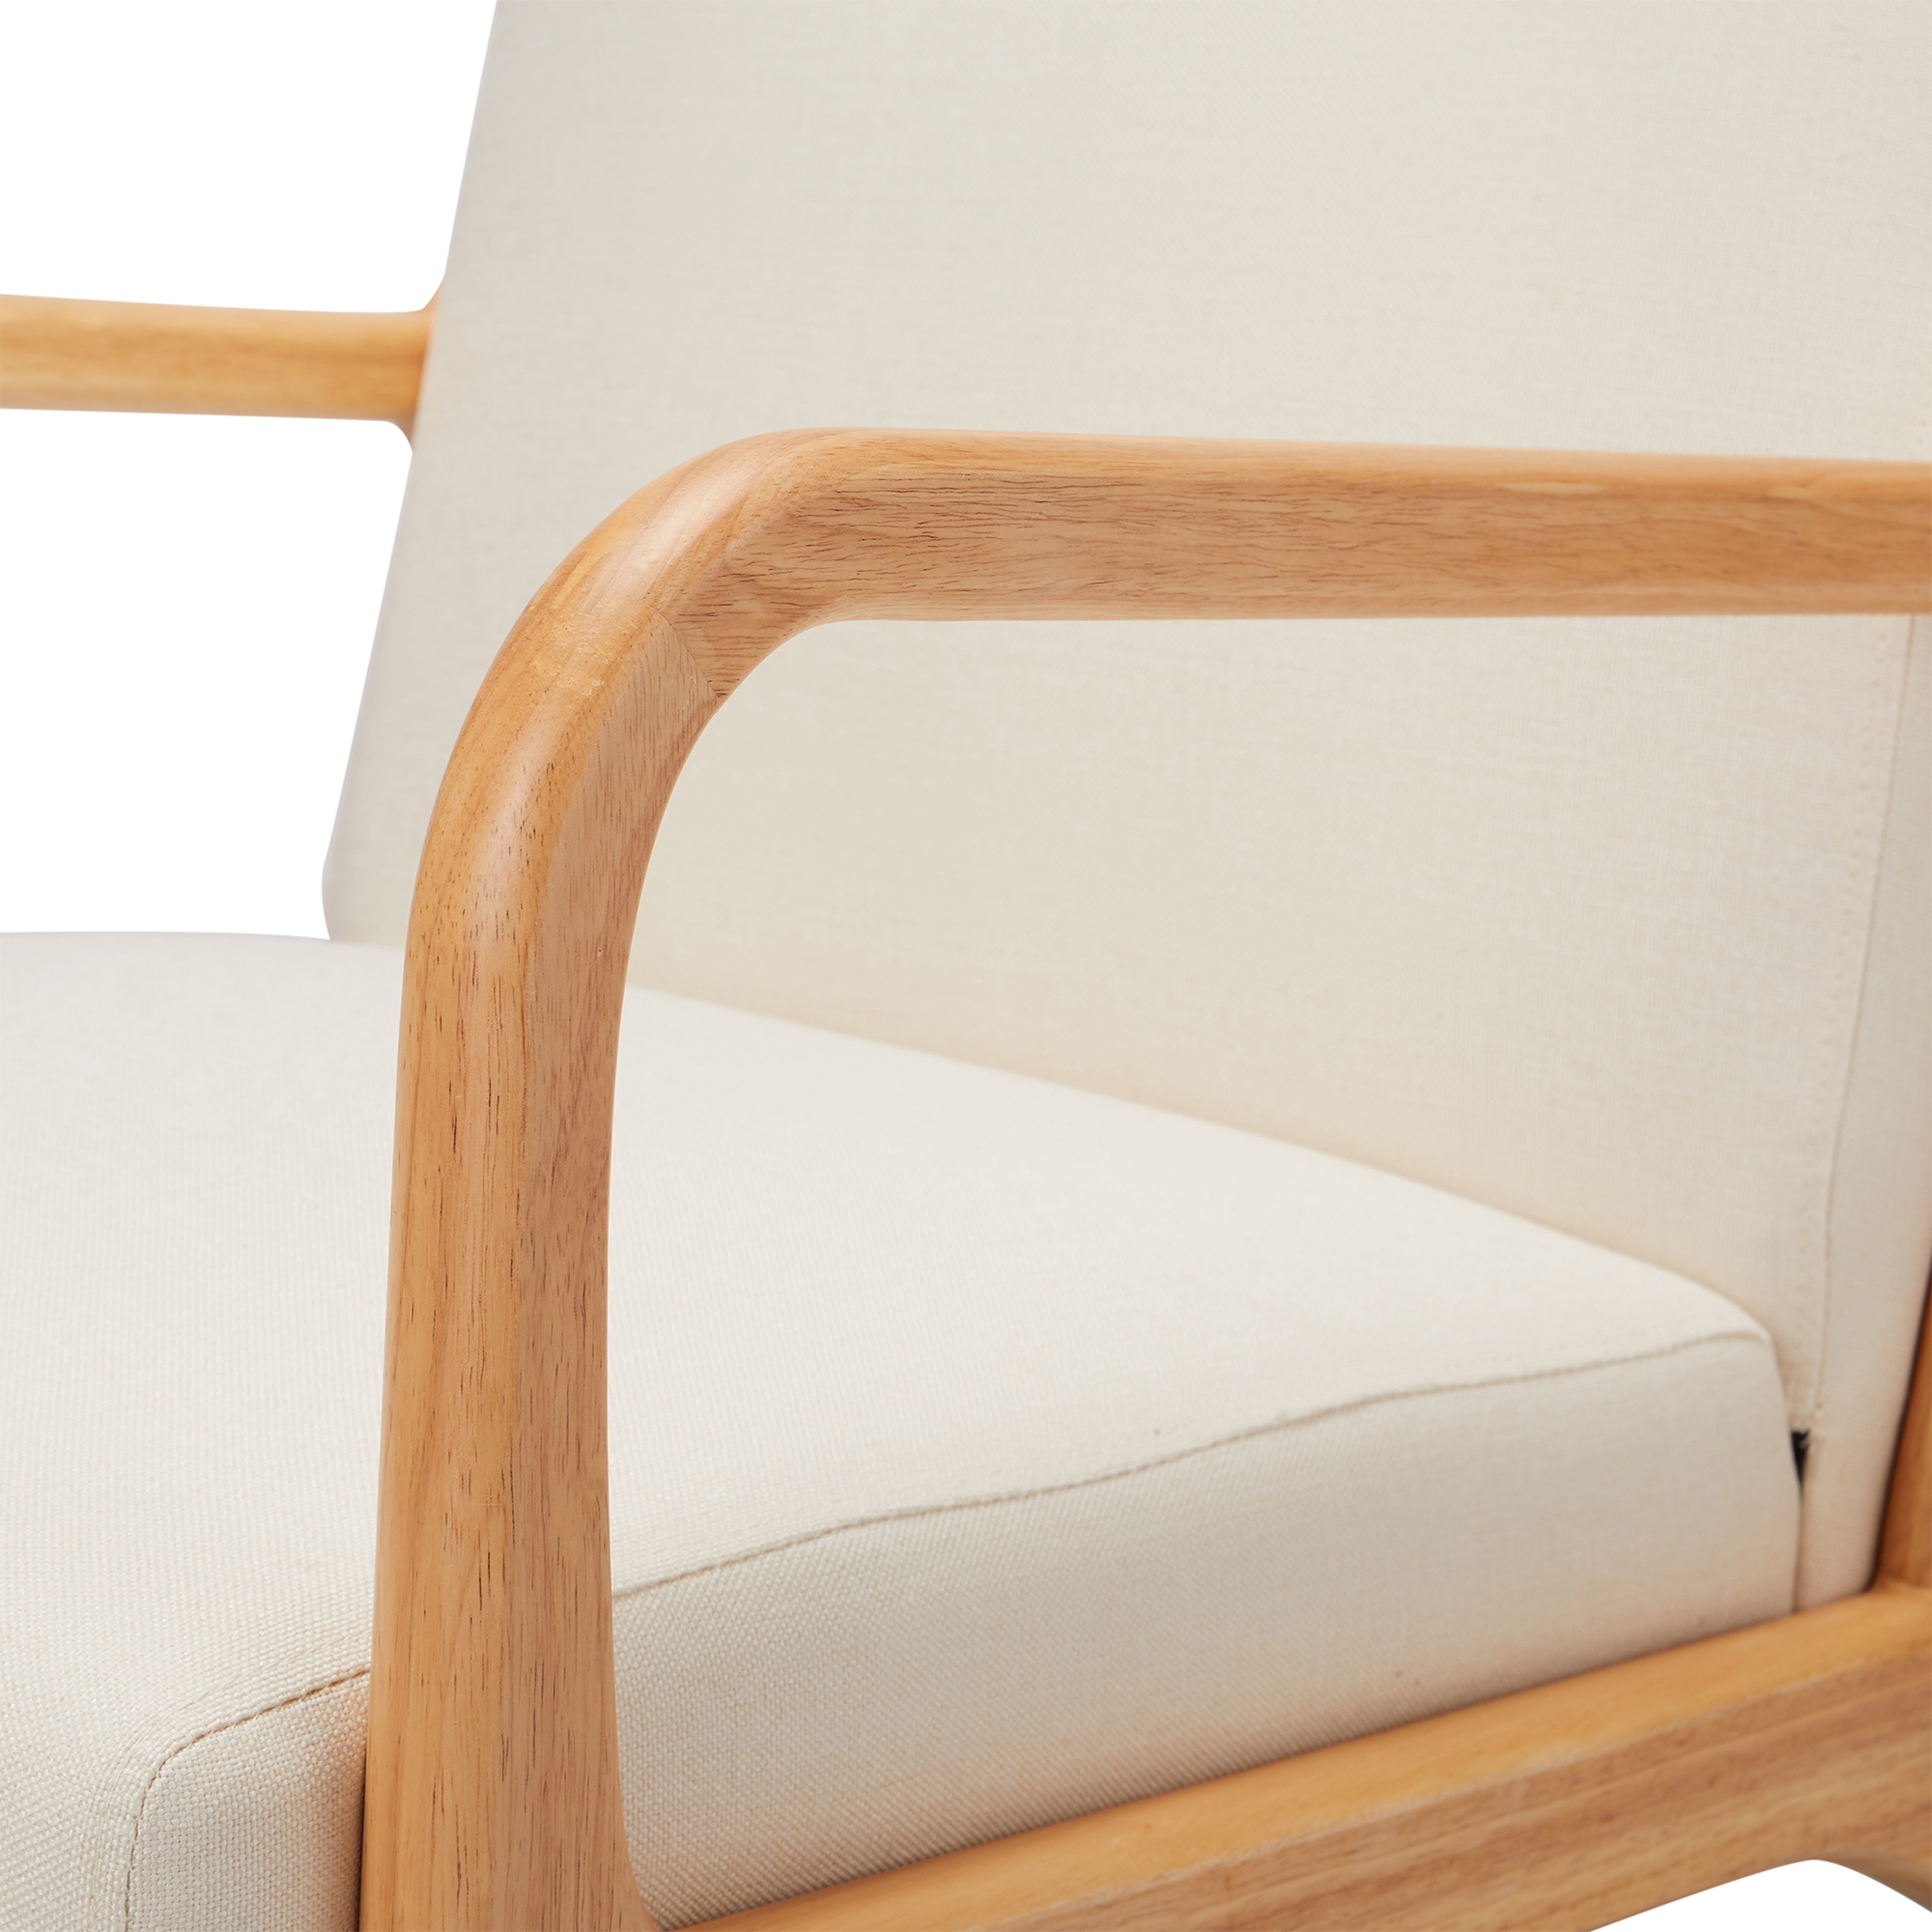 Jomeed Oak Wood Frame Mid Century Modern Accent Chair for Living Room - image 2 of 6